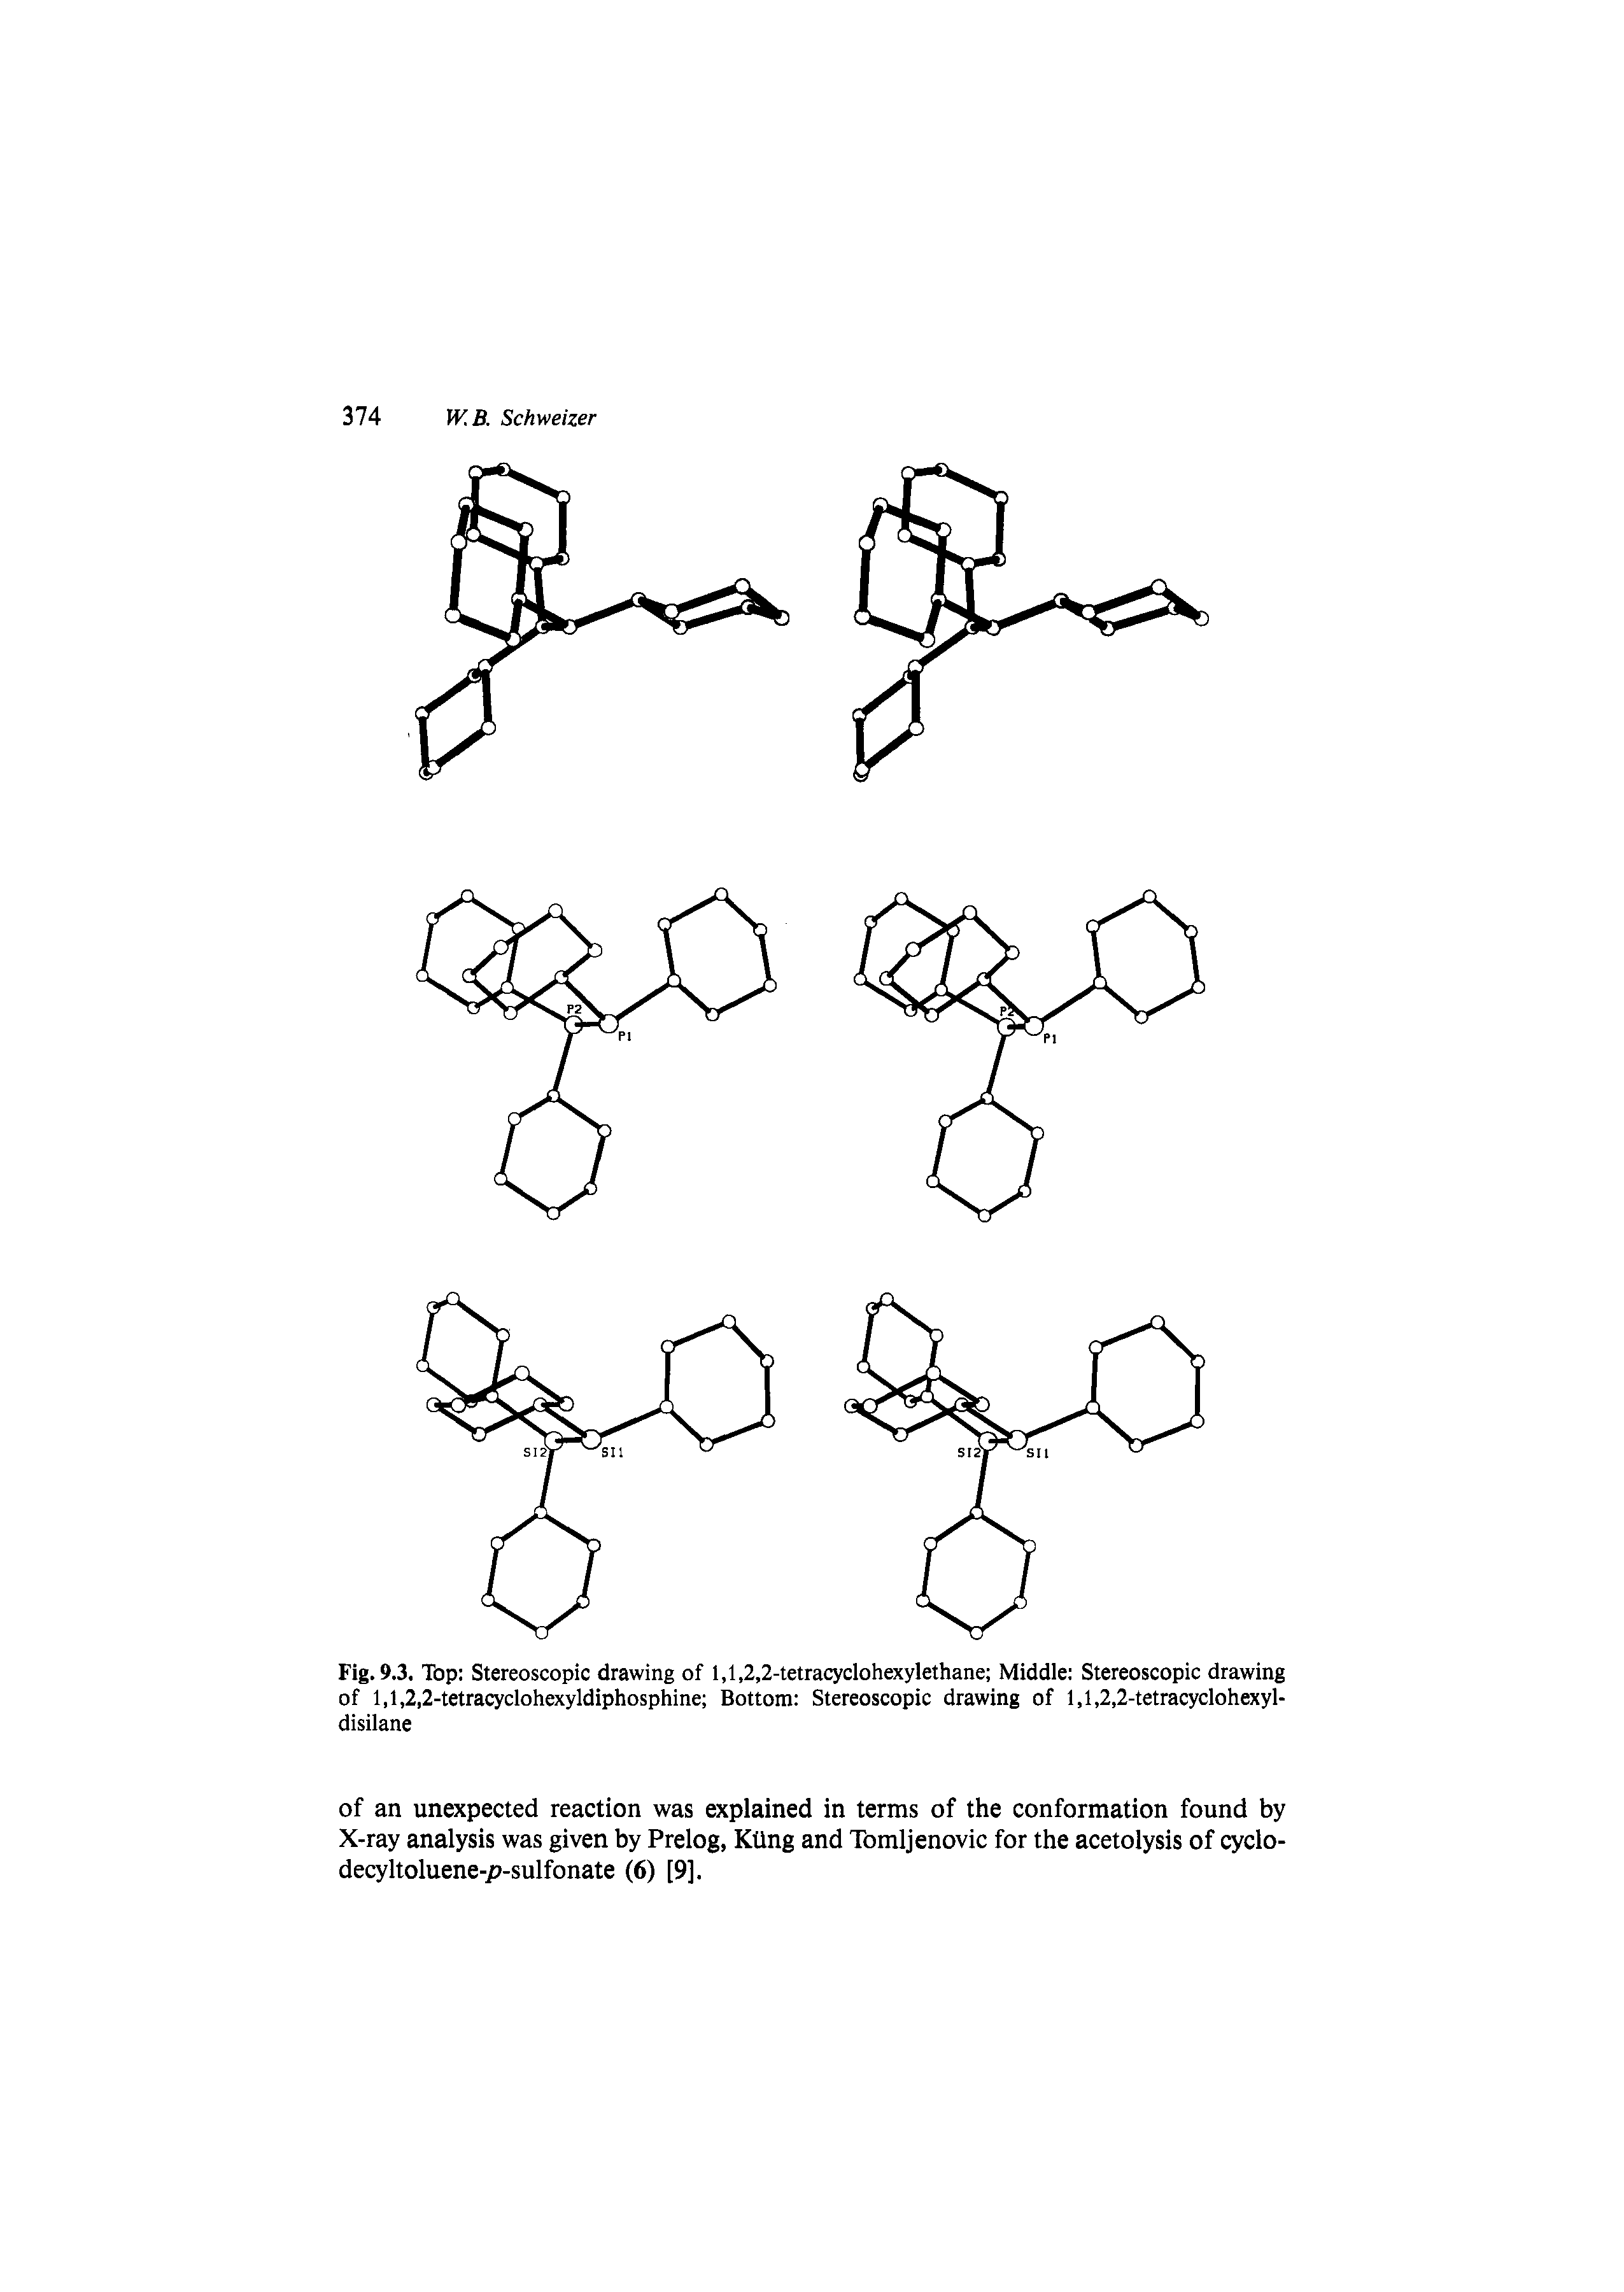 Fig. 9.3, Top Stereoscopic drawing of 1,1,2,2-tetracyclohexylethane Middle Stereoscopic drawing of 1,1,2,2-tetracyclohexyldiphosphine Bottom Stereoscopic drawing of 1,1,2,2-tetracyclohexyl-disilane...